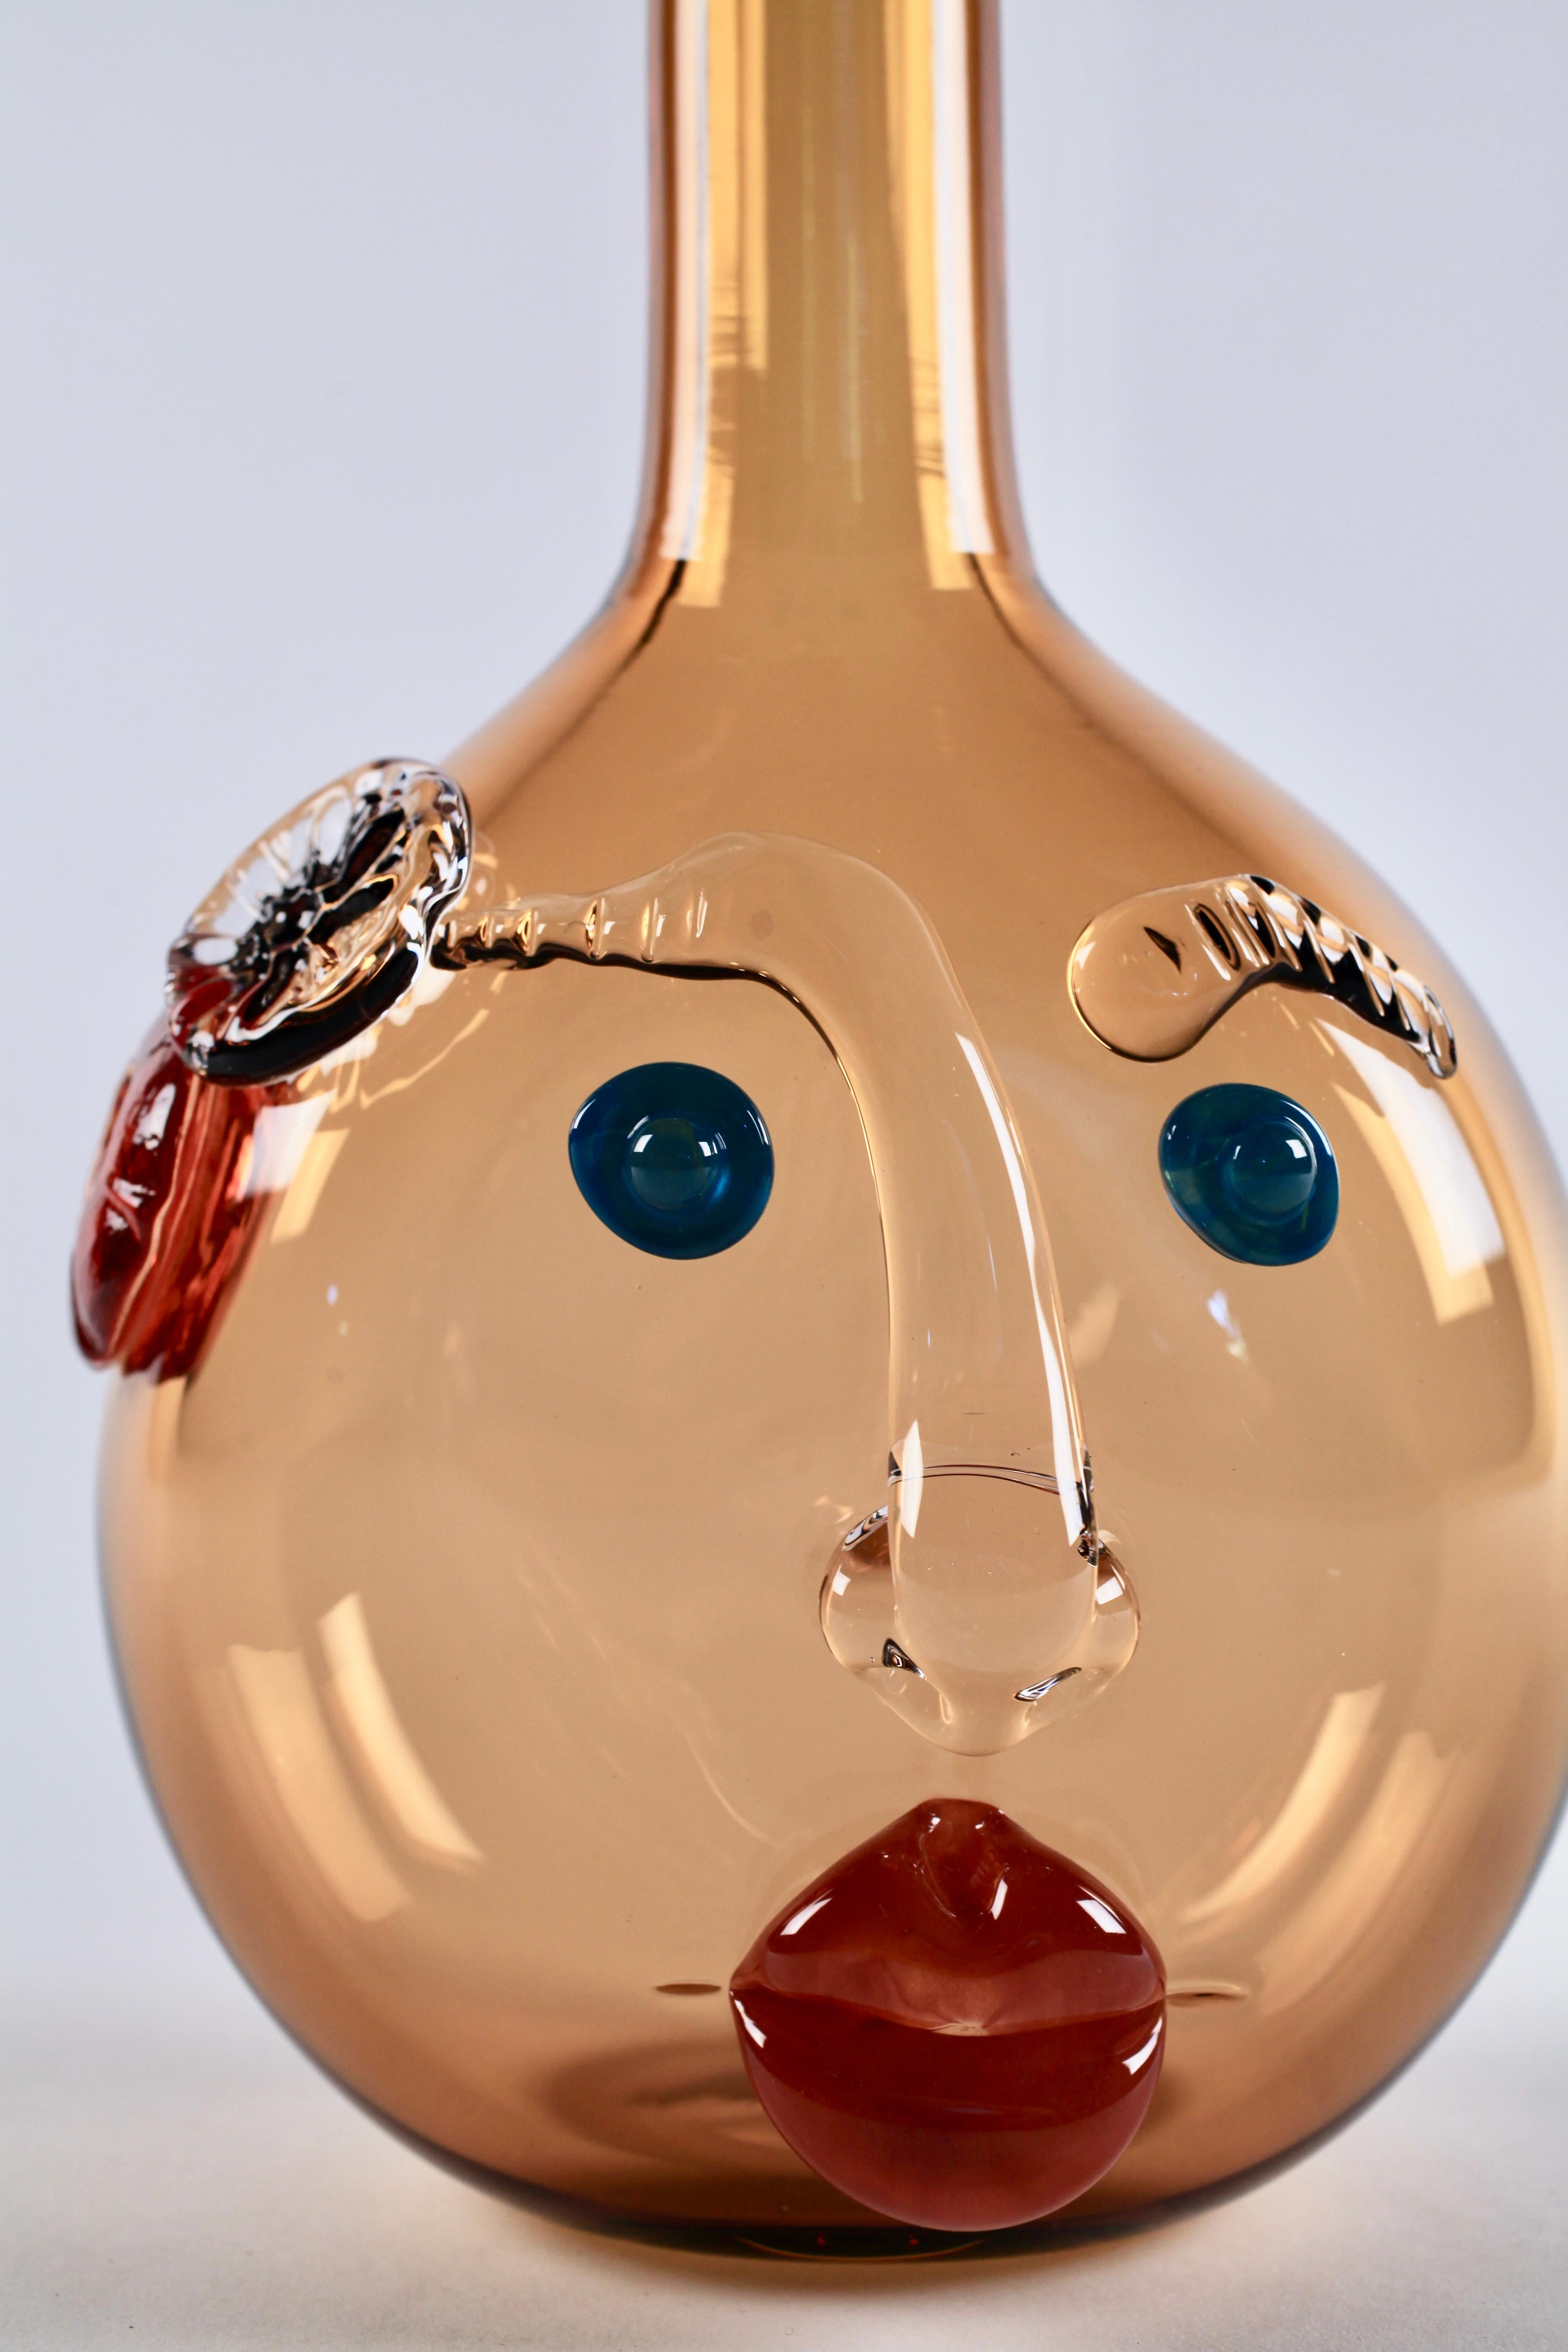 Hand blown and hot sculpted glass, this amber Bottle-head vessel by Elizabeth Lyons is both playful and sophisticated, blooming with a personality all its own. Elizabeth makes these sculptural hand blown bottles in her Rochester, NY studio. Their